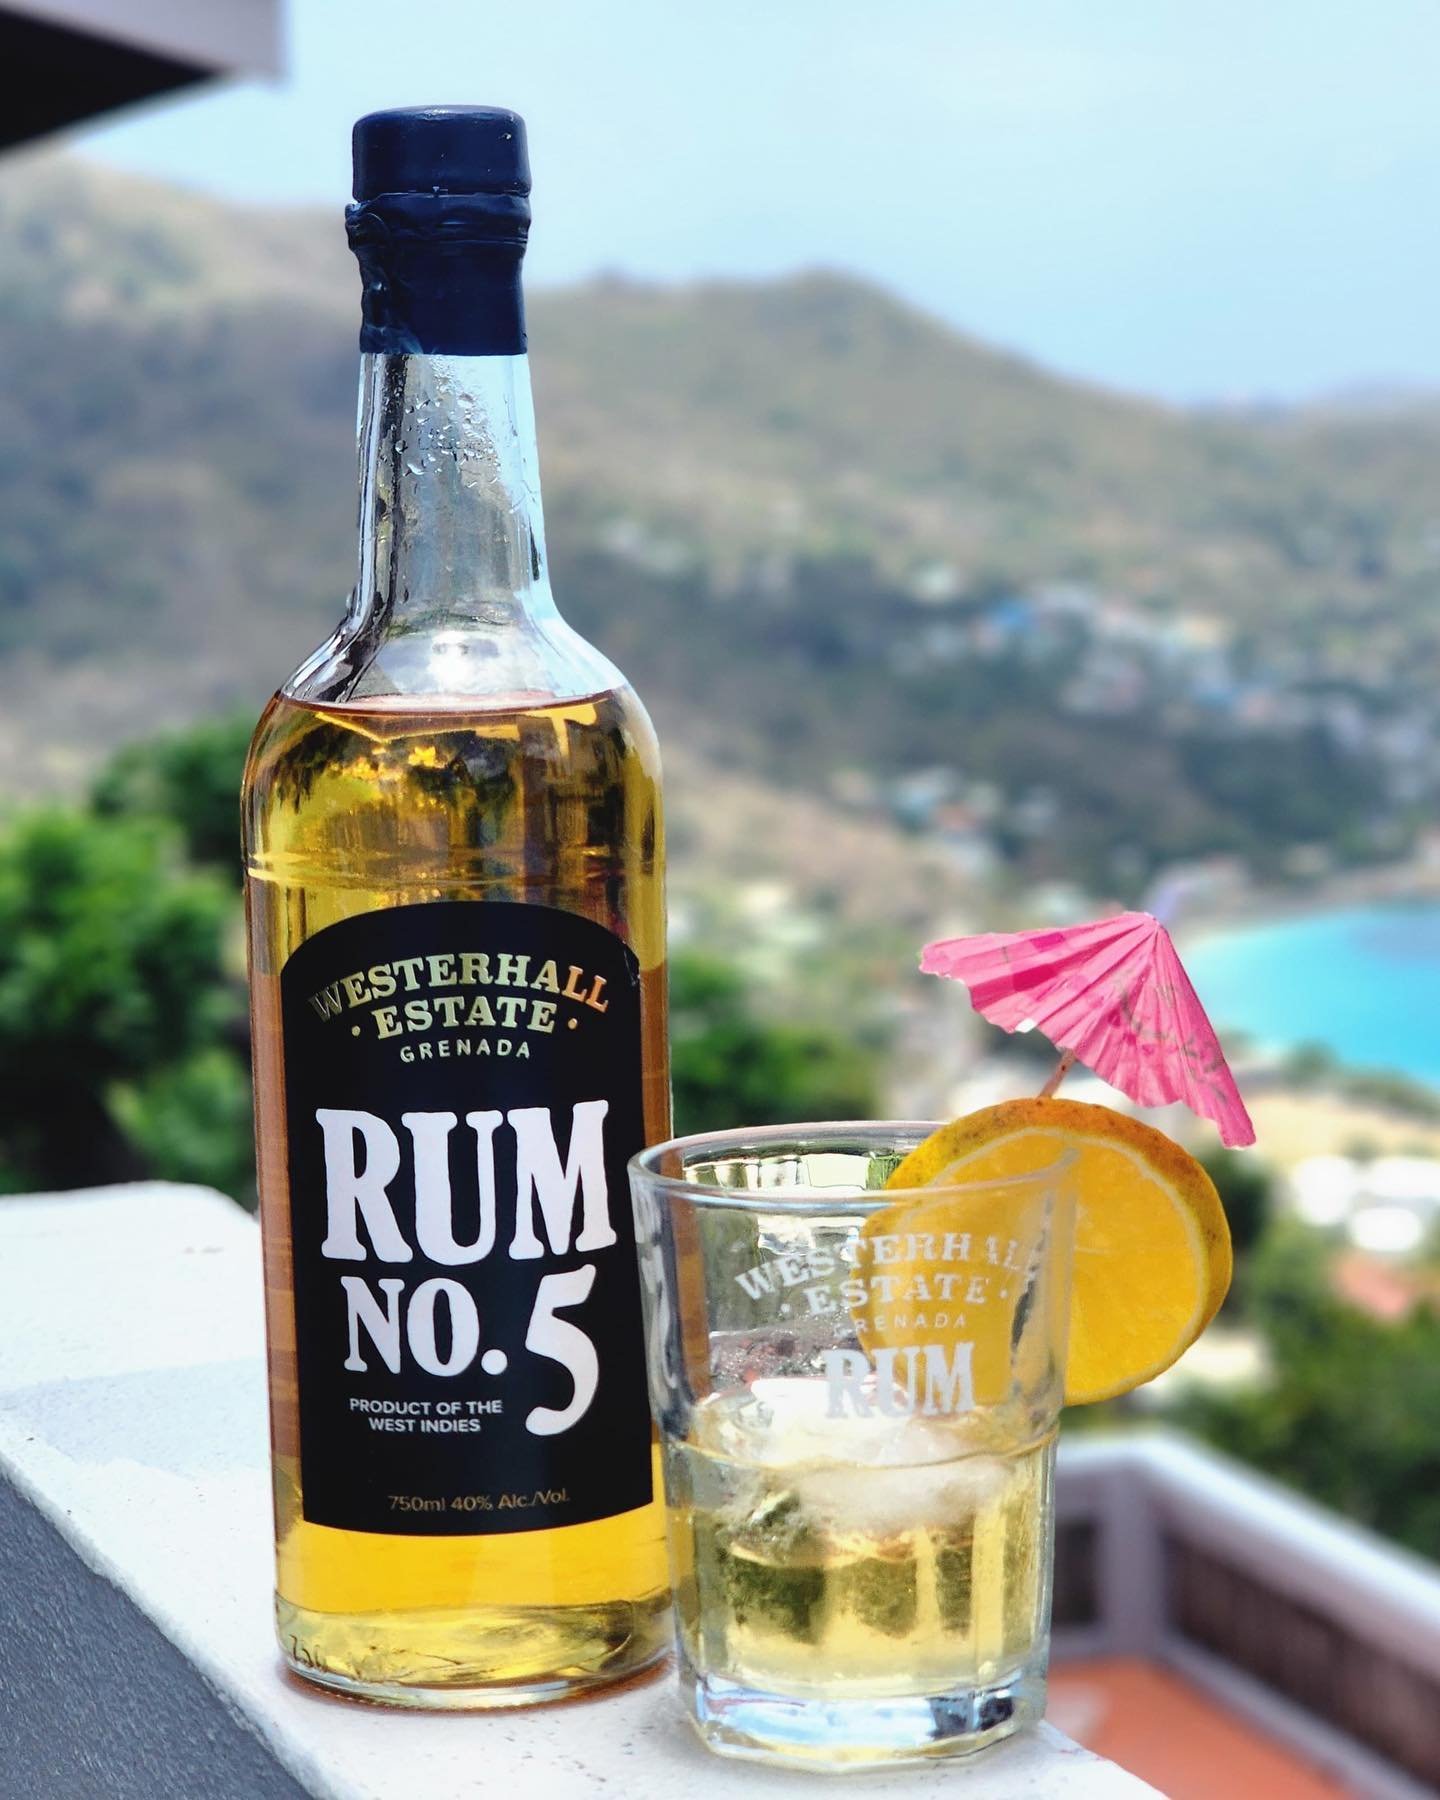 Rum No. 5 🥃

With every pour of Rum there&rsquo;s a taste of paradise in every sip. 🌴

#WesterhallRum #IslandLuxury